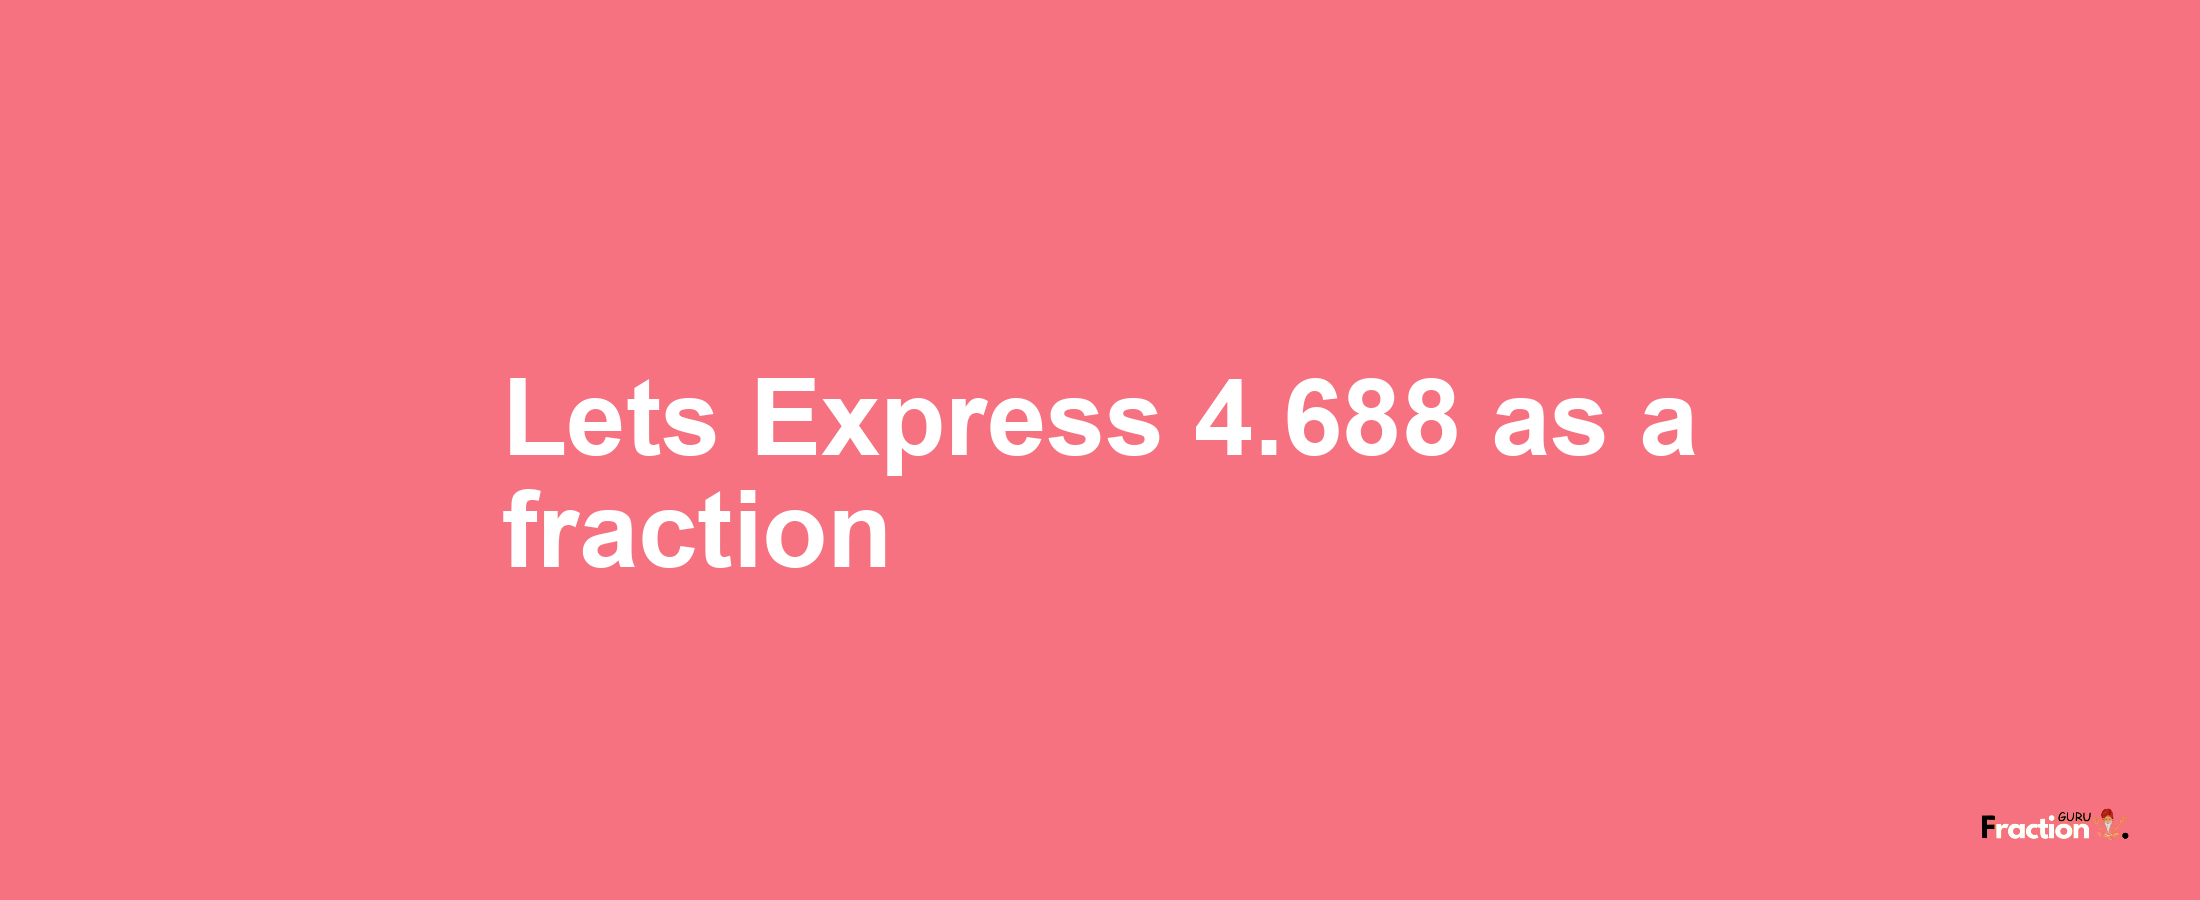 Lets Express 4.688 as afraction